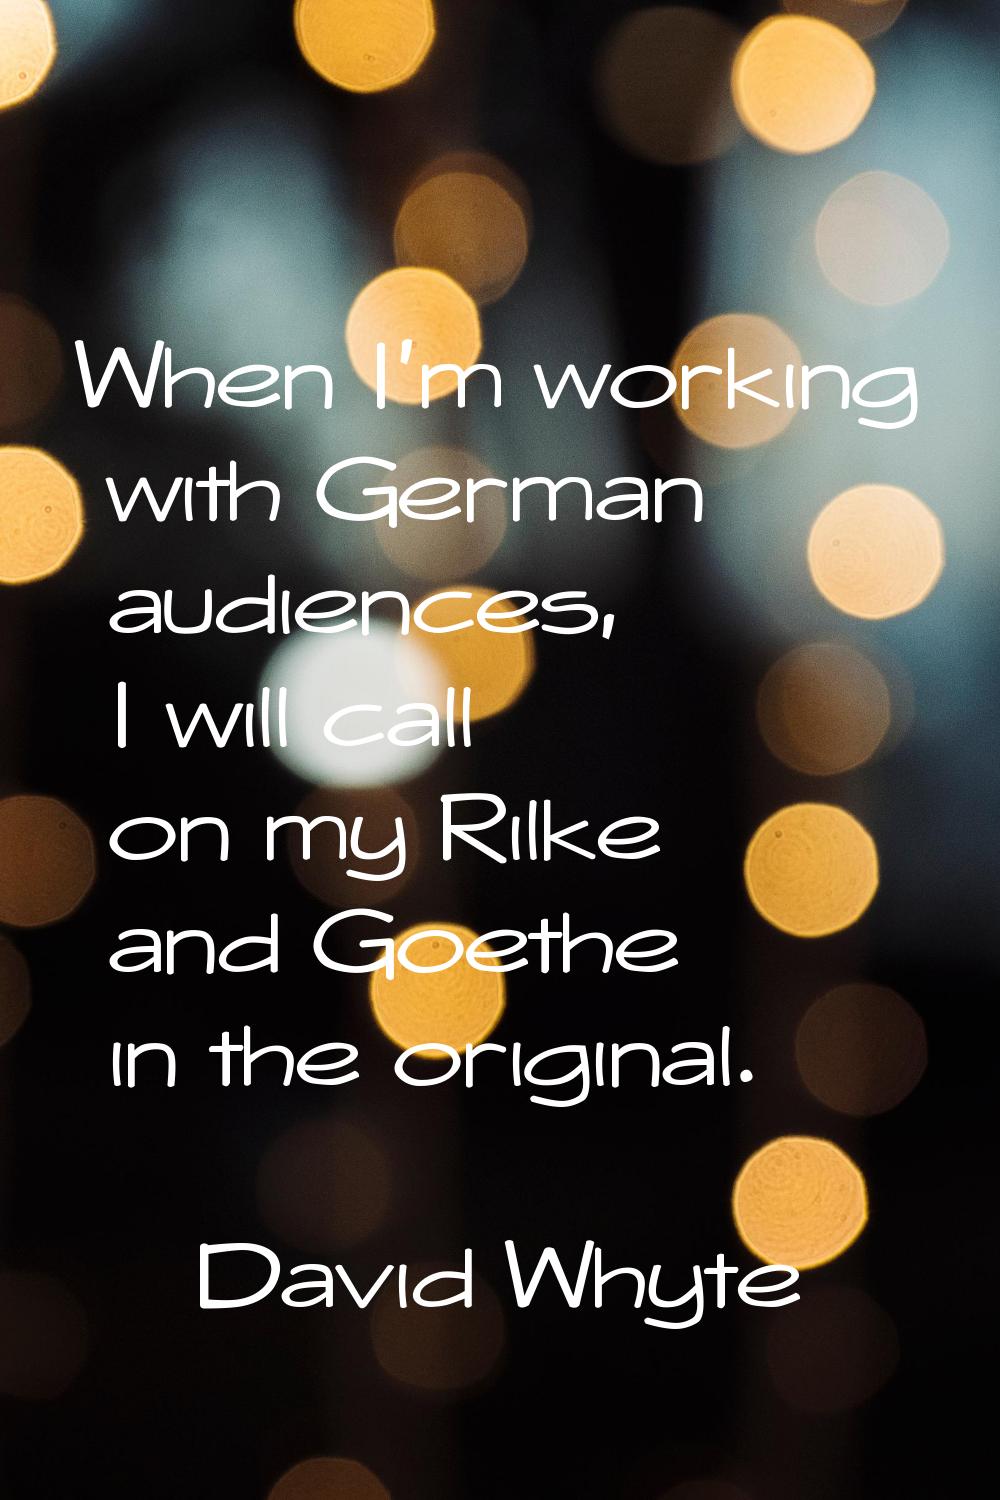 When I'm working with German audiences, I will call on my Rilke and Goethe in the original.